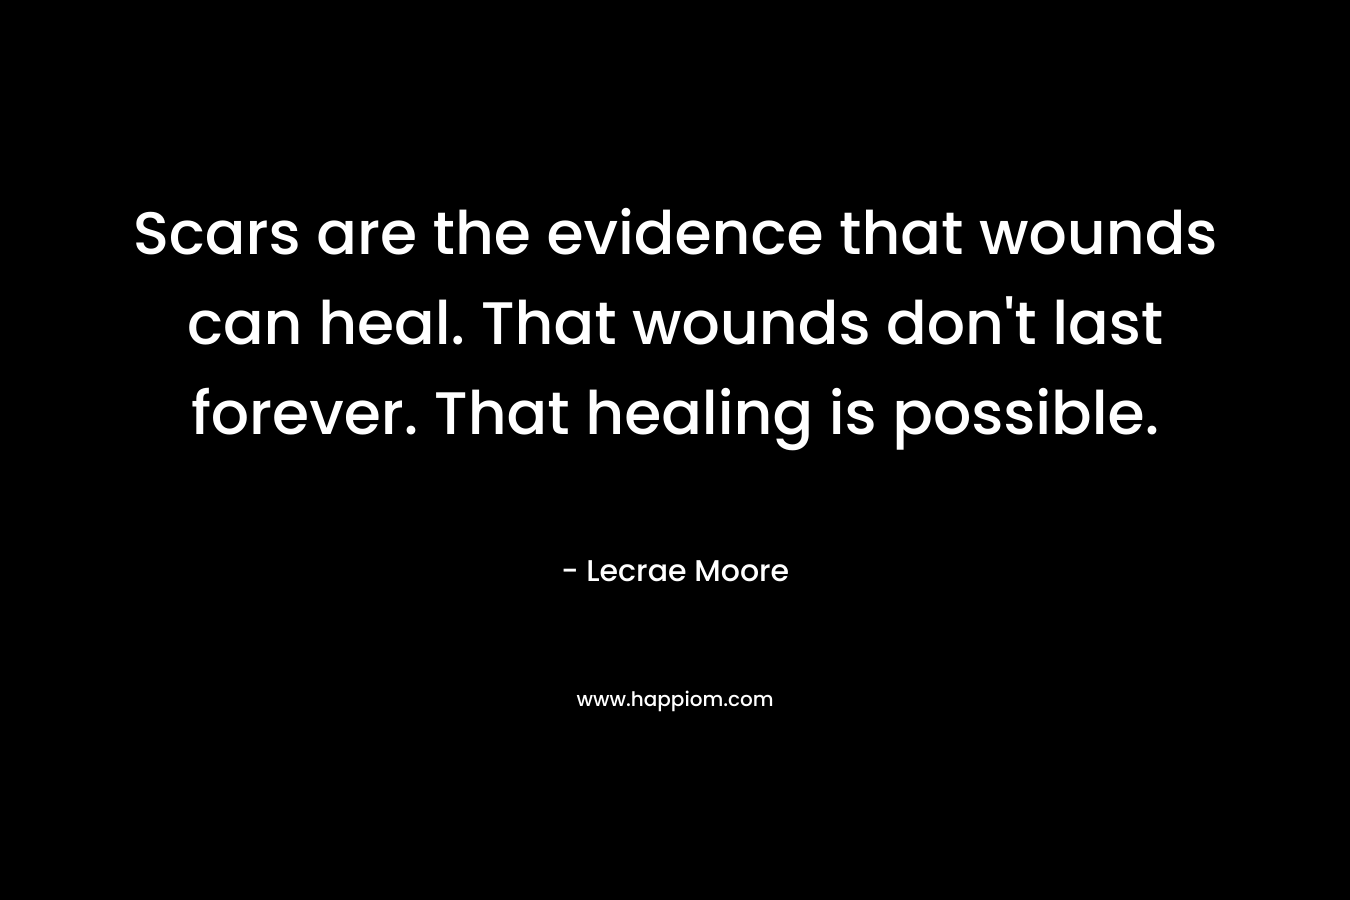 Scars are the evidence that wounds can heal. That wounds don't last forever. That healing is possible.